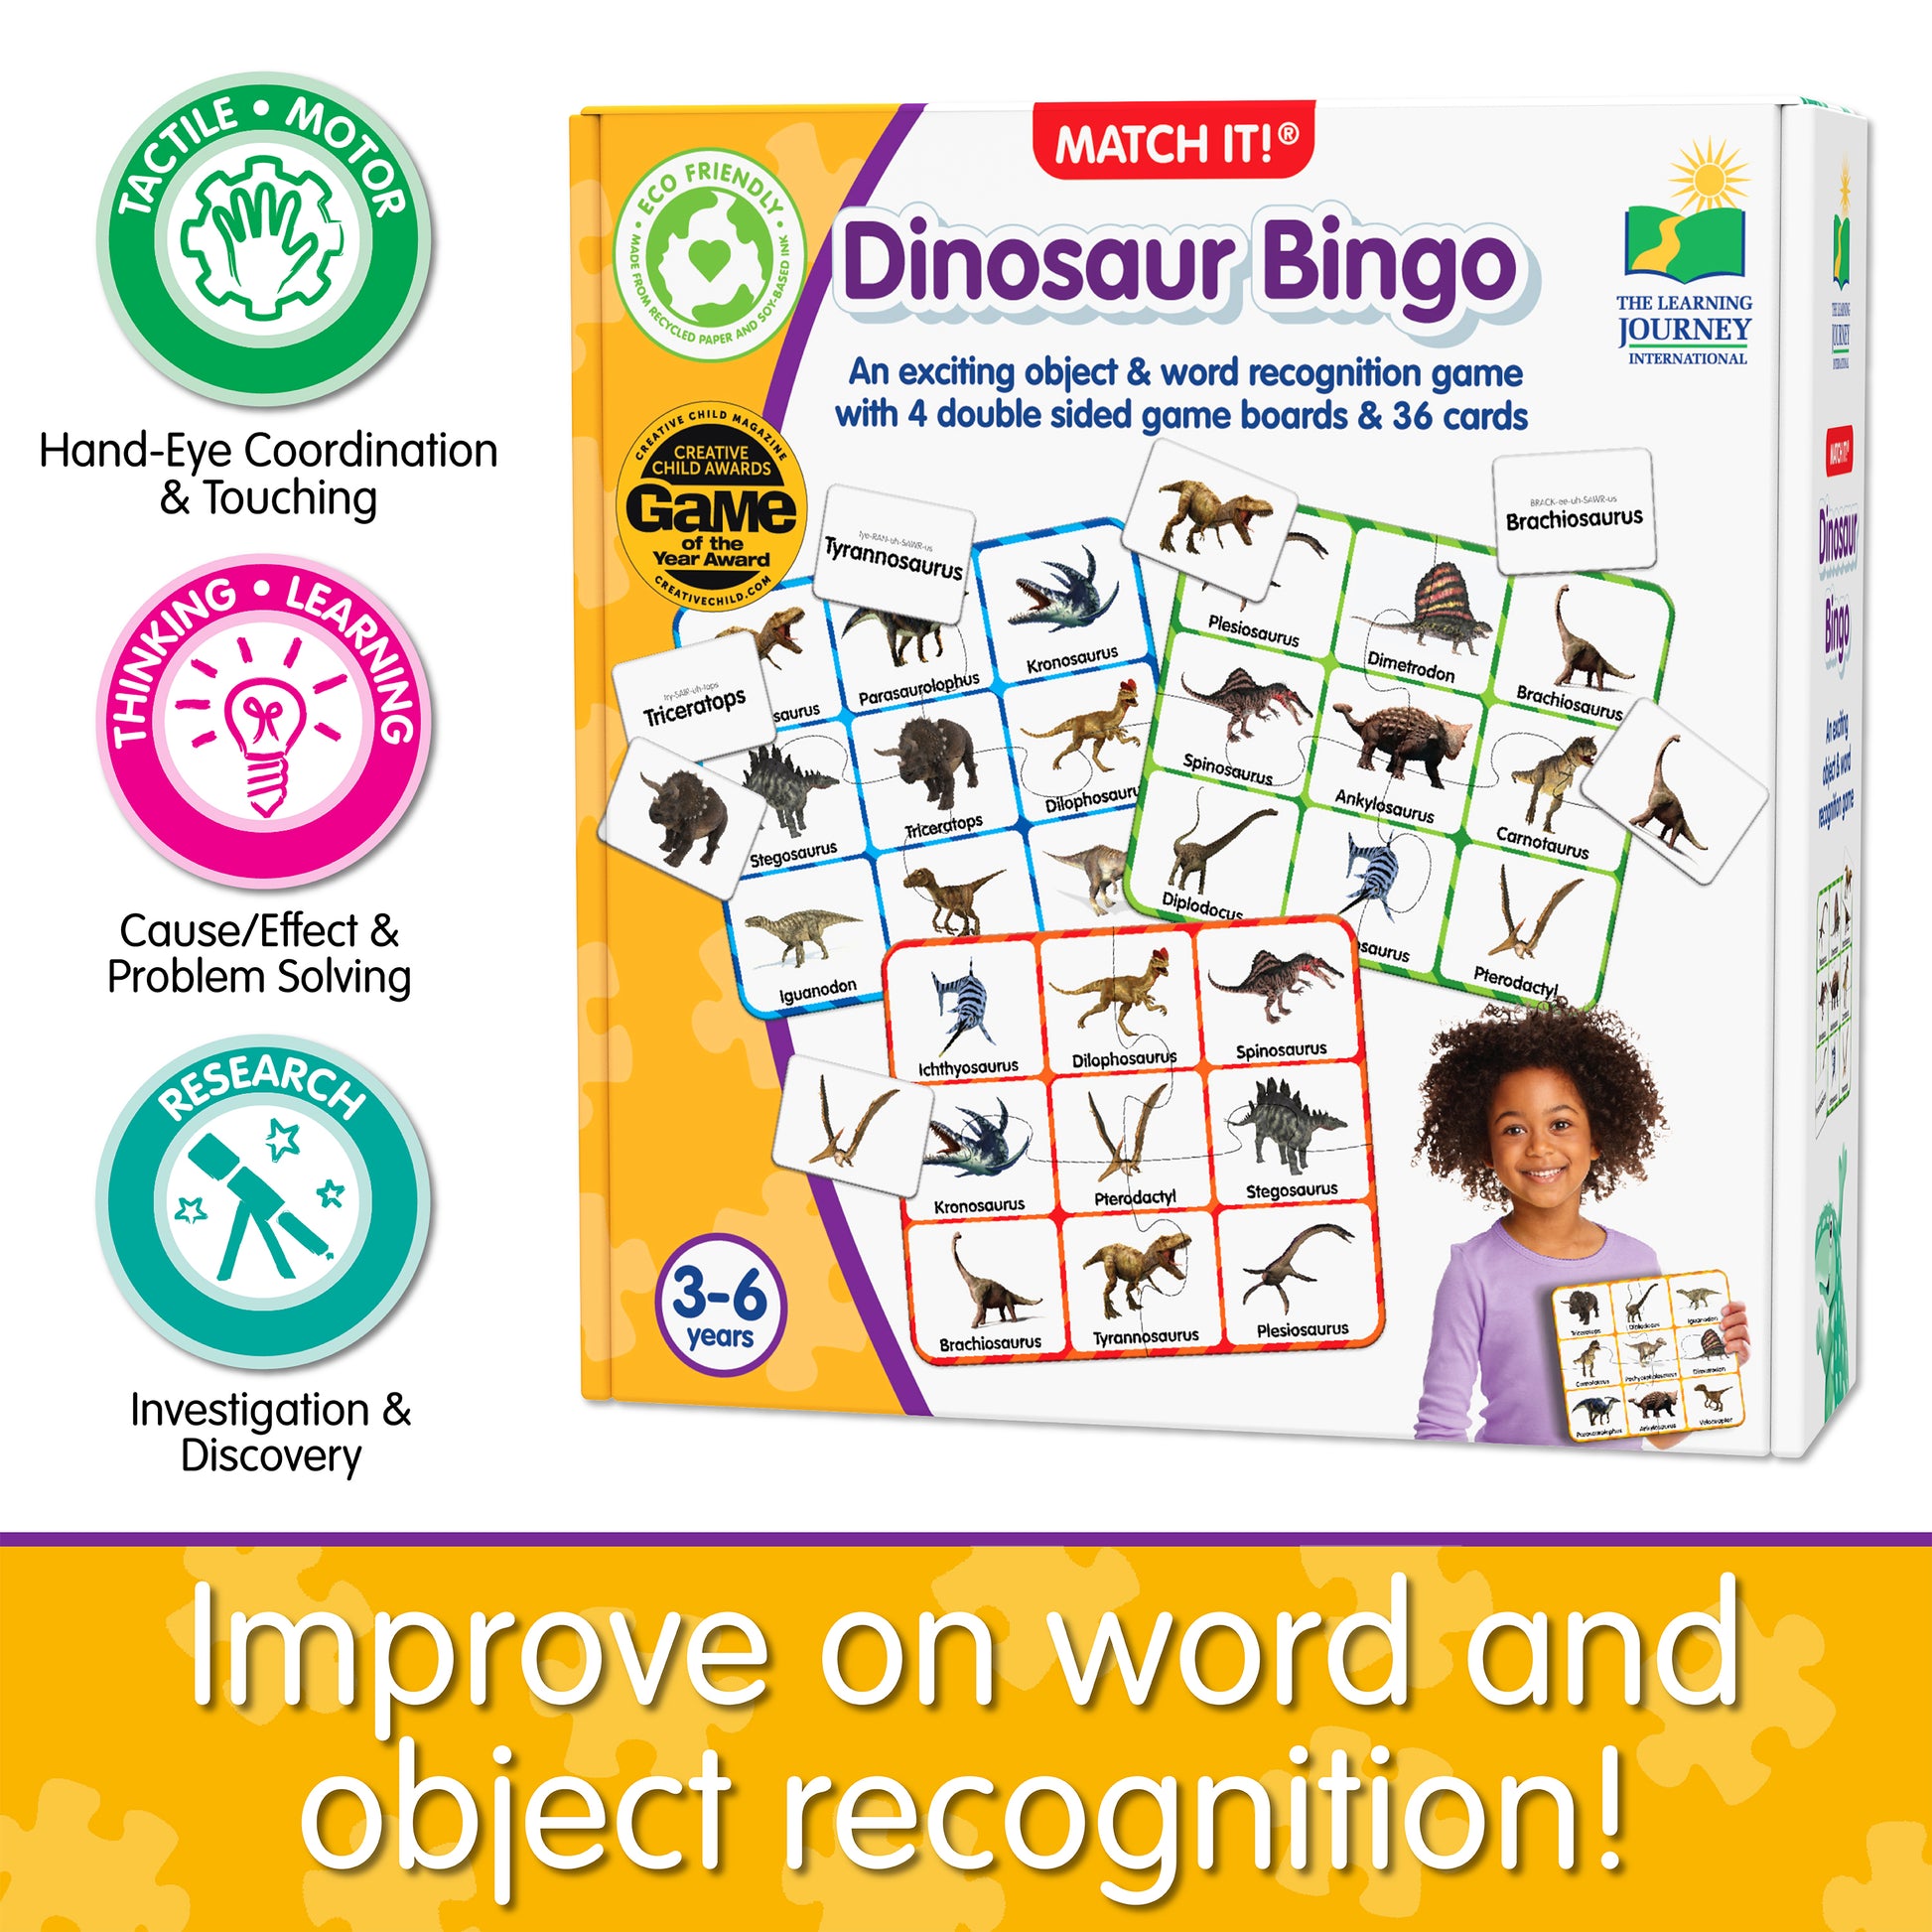 Infographic about Match It - Dinosaur Bingo's educational benefits that says, "Improve on word and object recognition!"